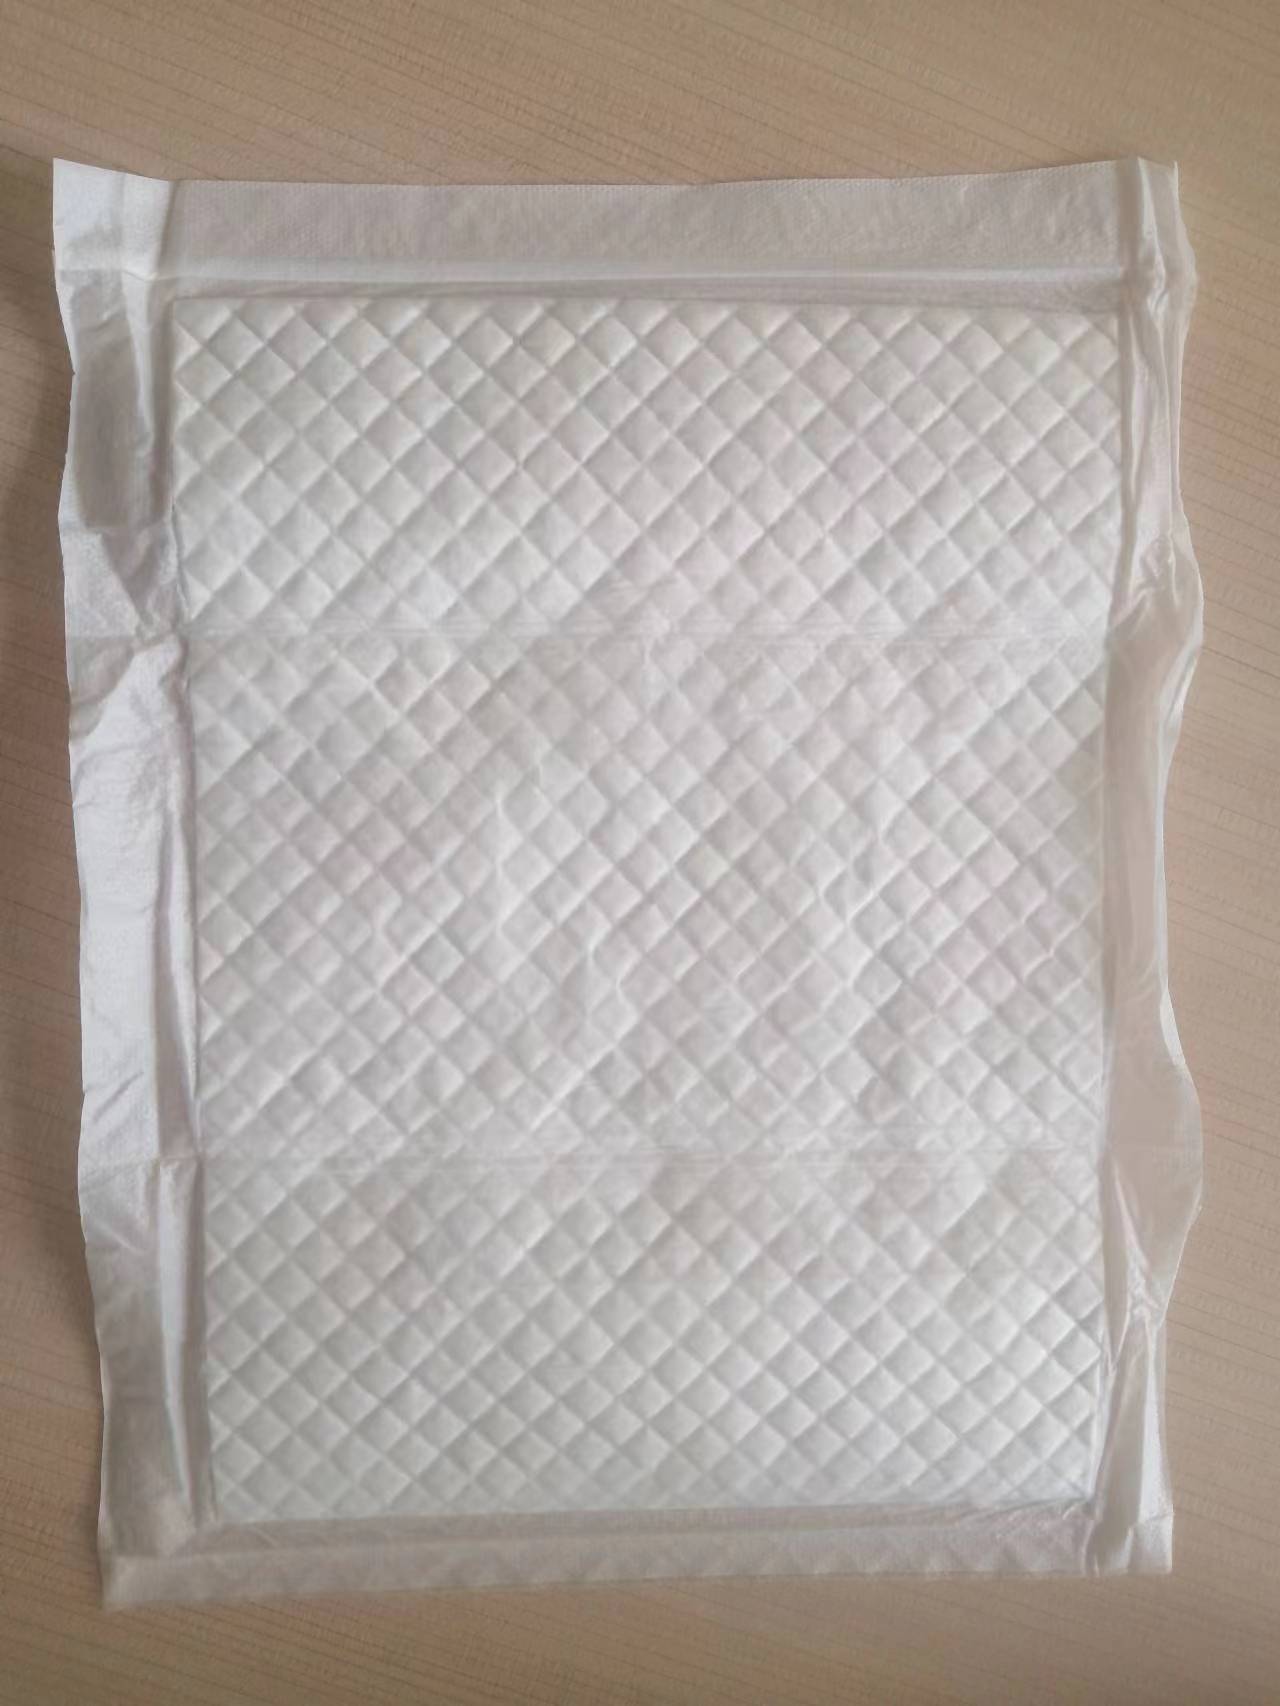 Super soft disposable Nursing baby pads breathable surface for new babies Baby Urine Bed pads